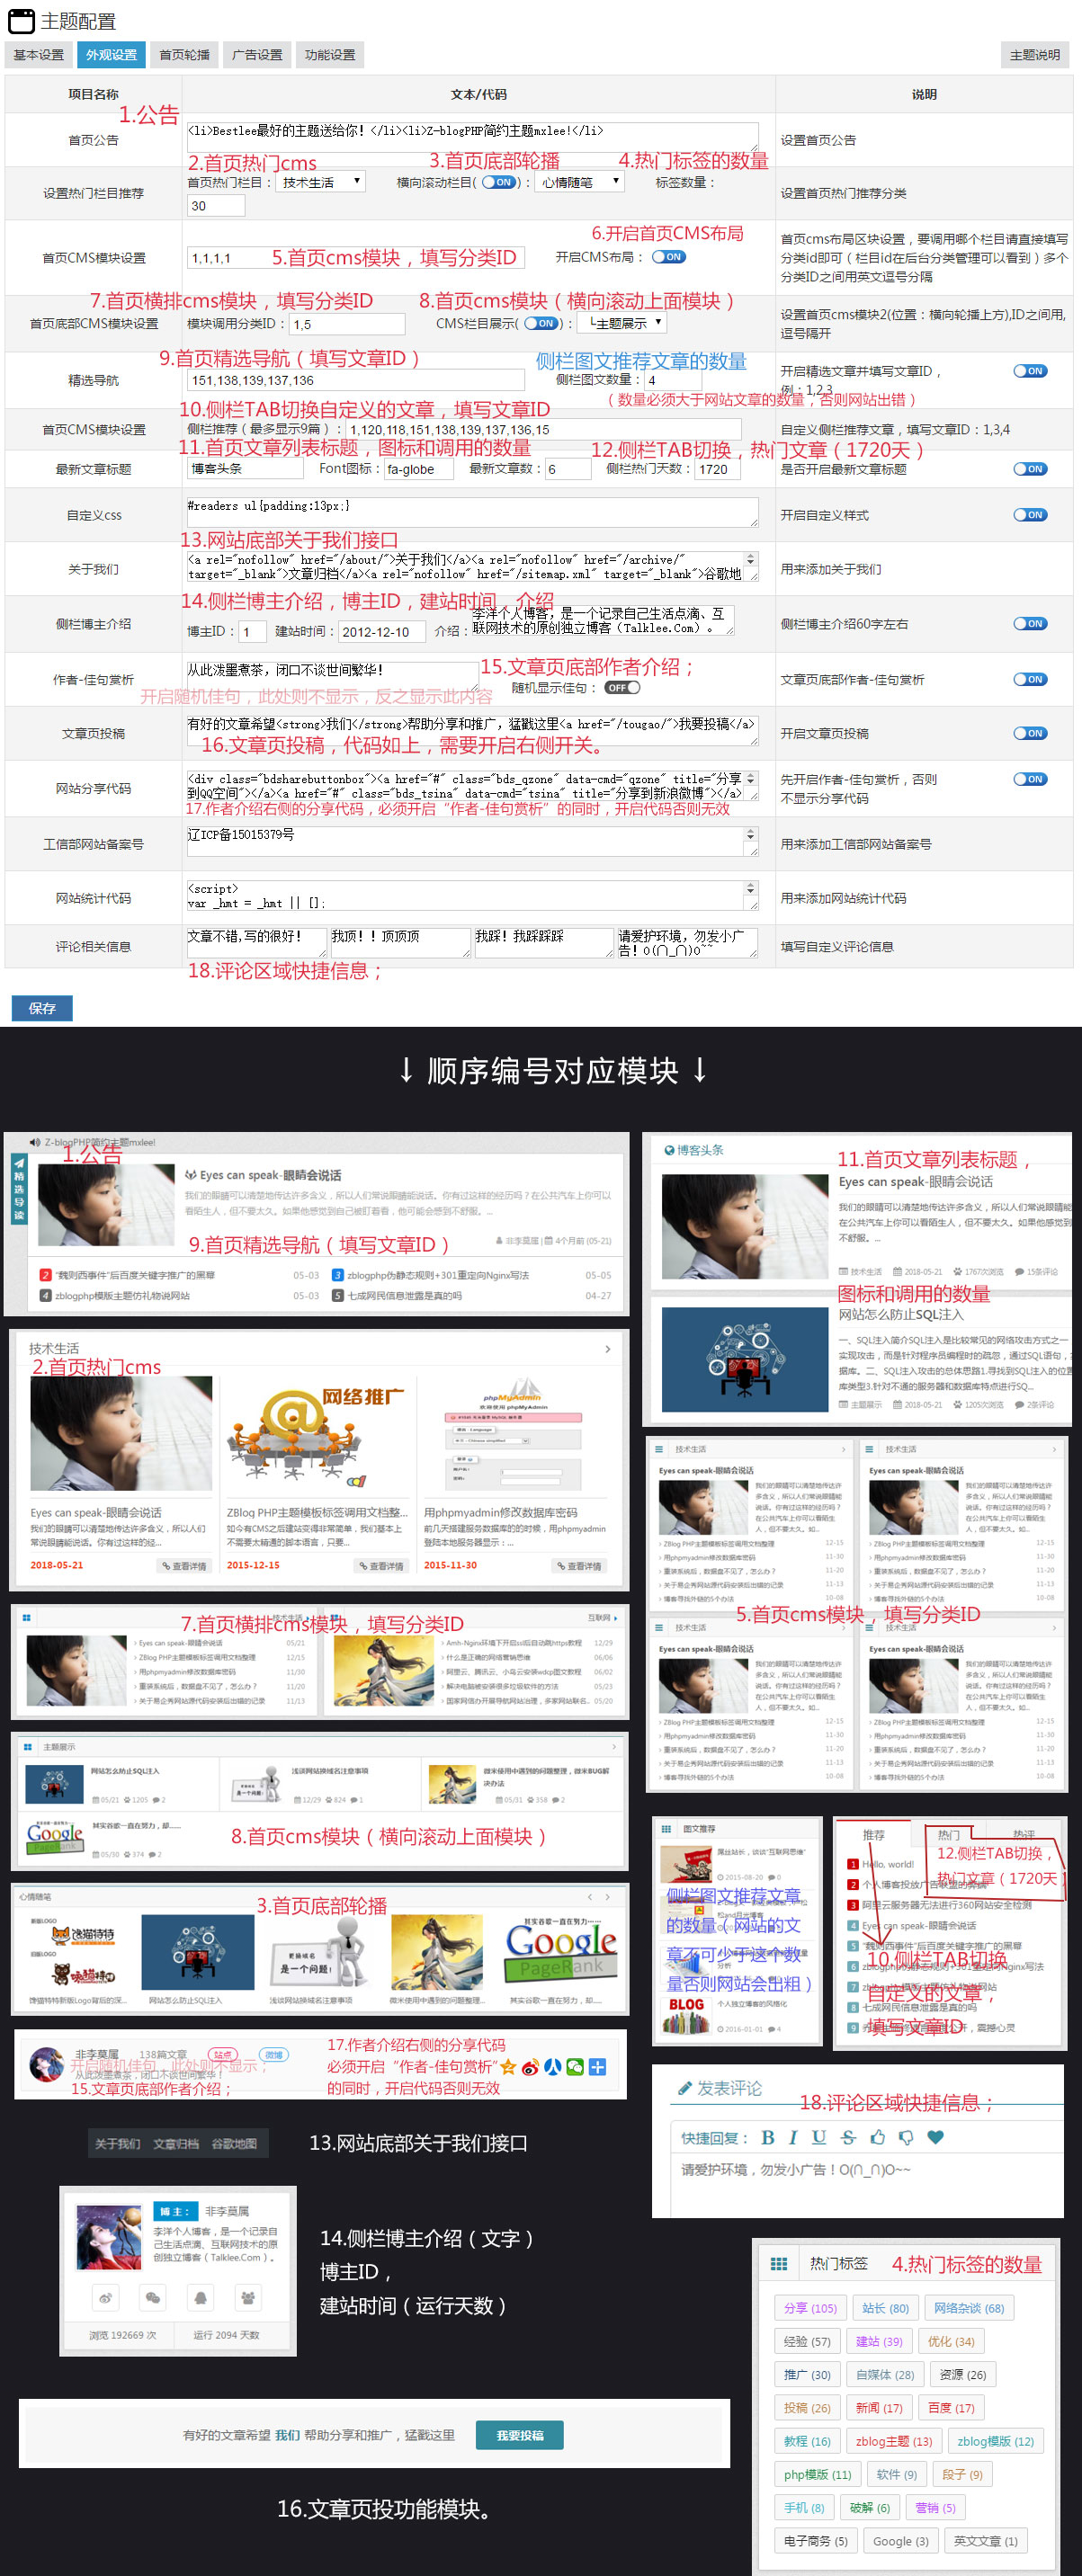  Li Yang's personal blog "mxlee" zblog theme - dreamer (recommended products) page 19